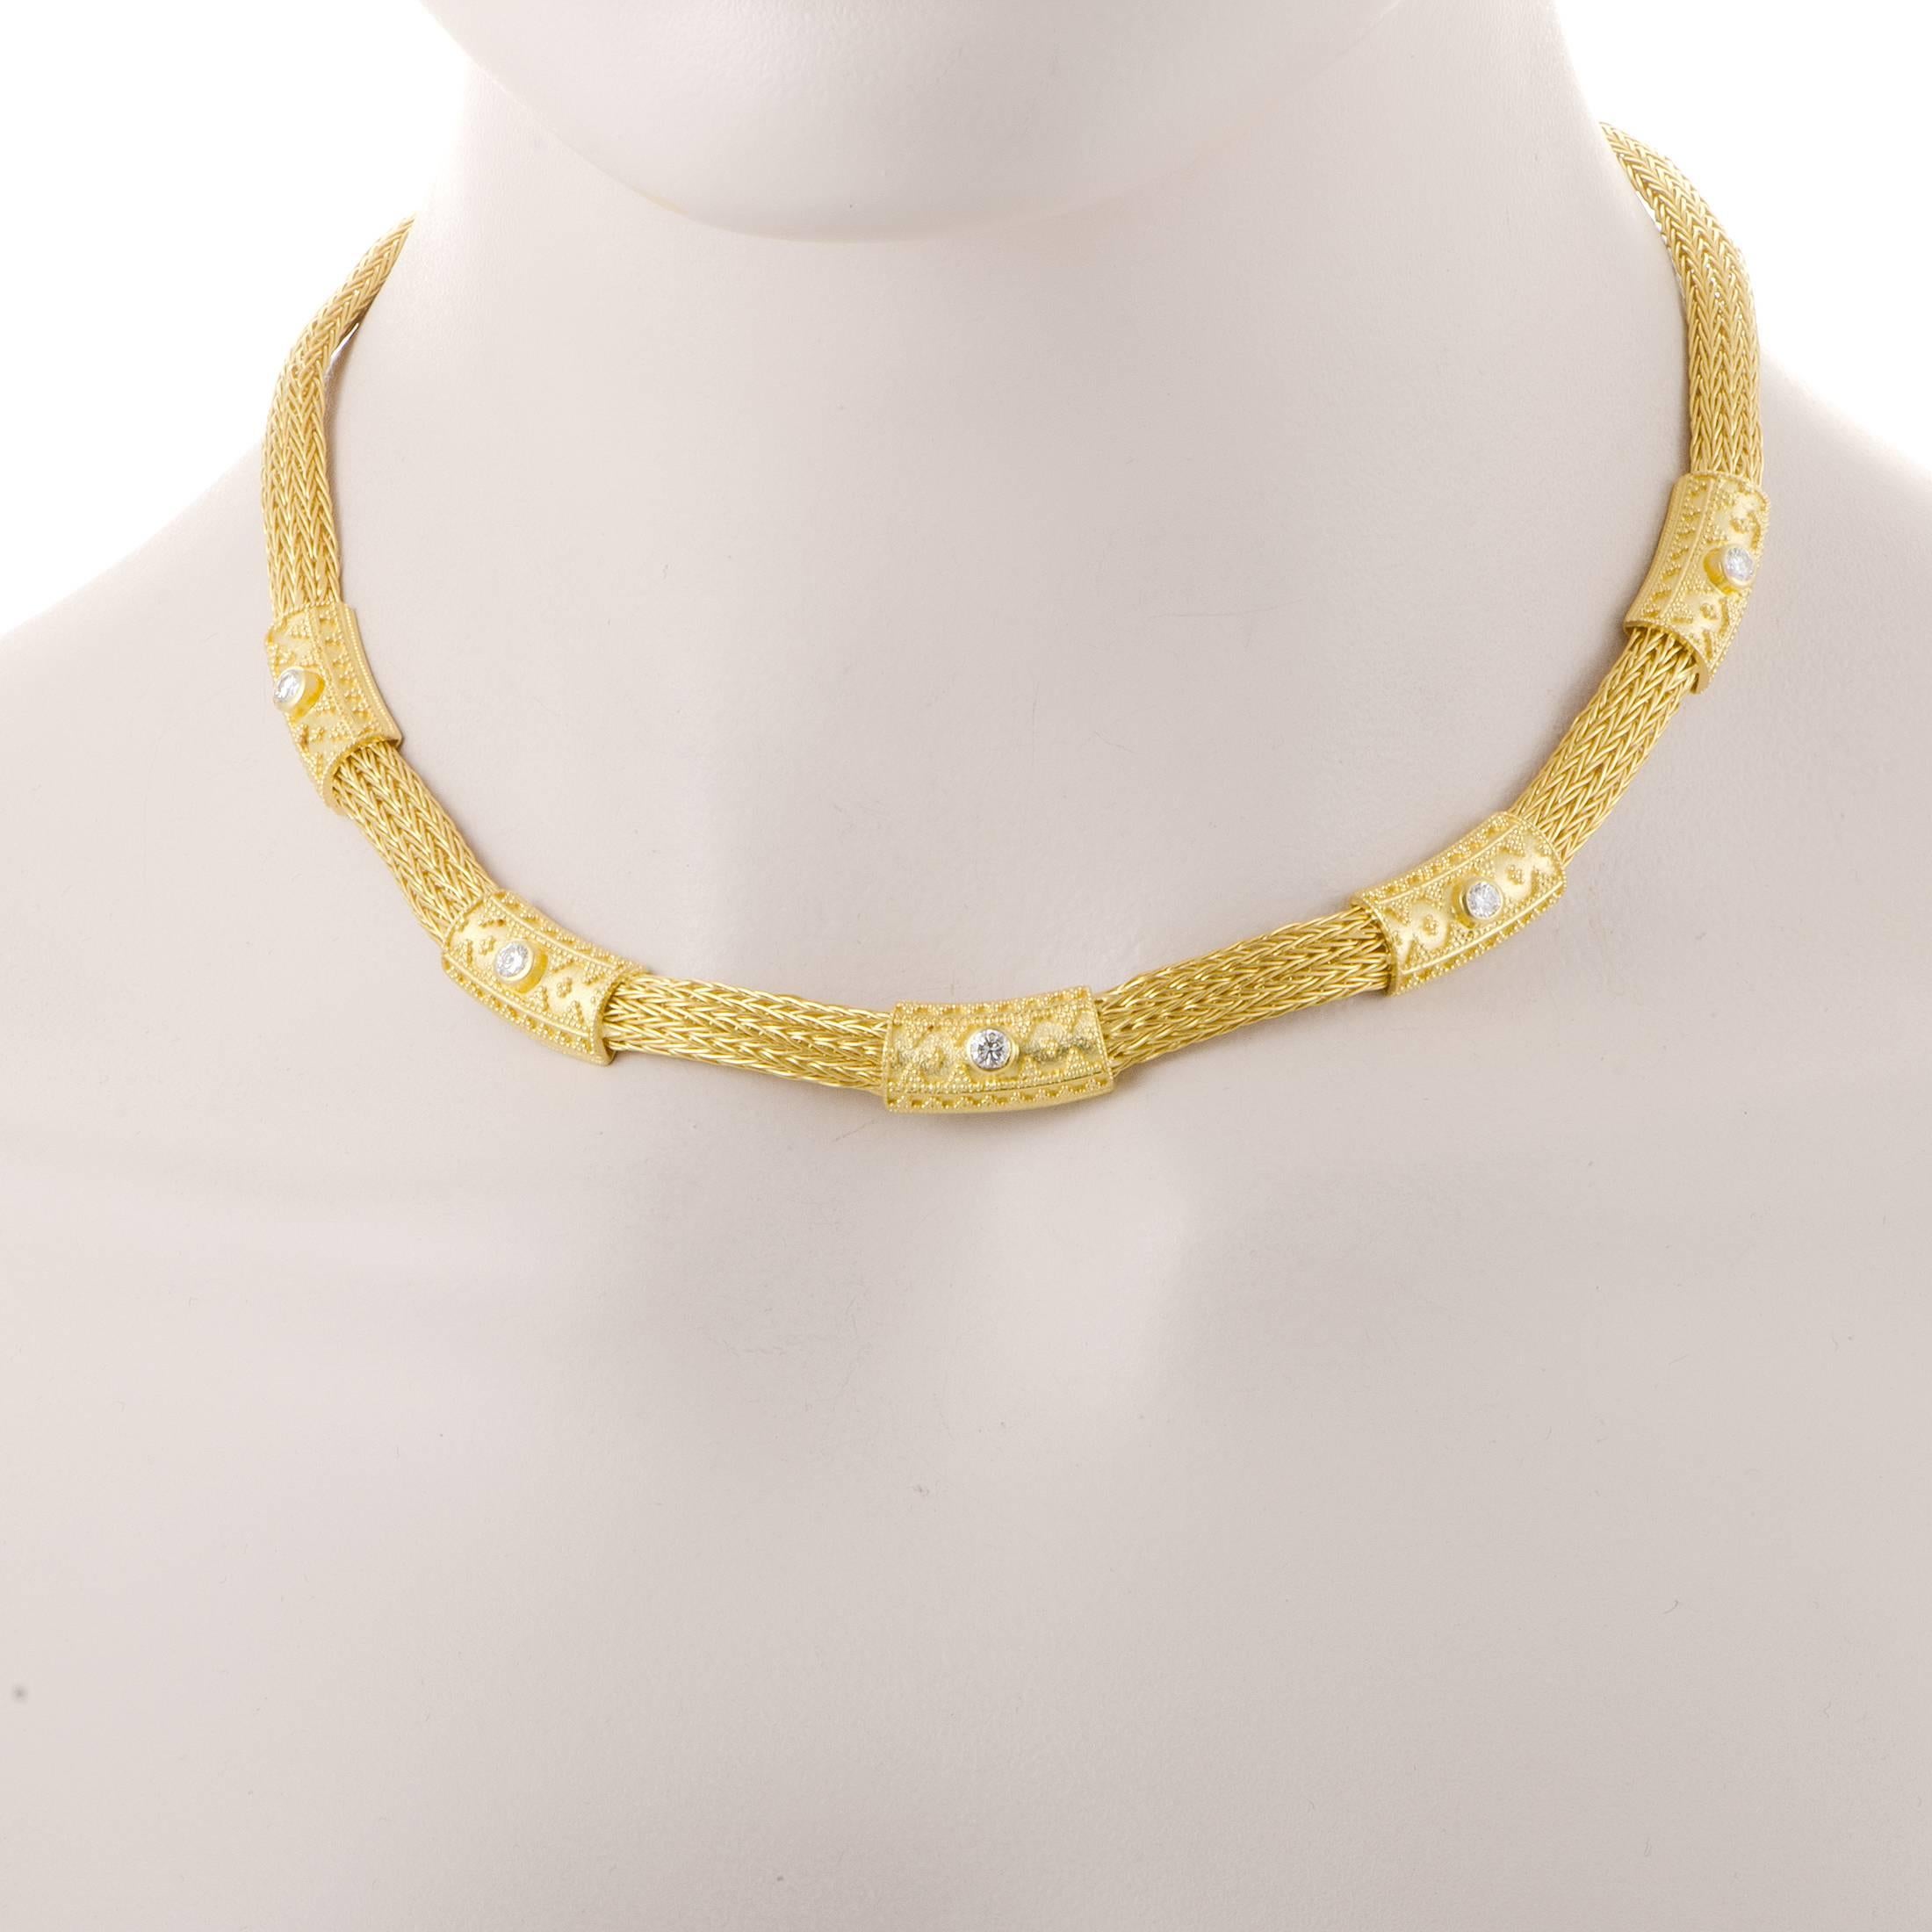 The intricate pattern of fabulous 18K yellow gold combines with the lavish brilliance of diamonds totaling 1.25 carats to produce a mesmerizing visual effect in this exuberant necklace from Ilias Lalaounis.